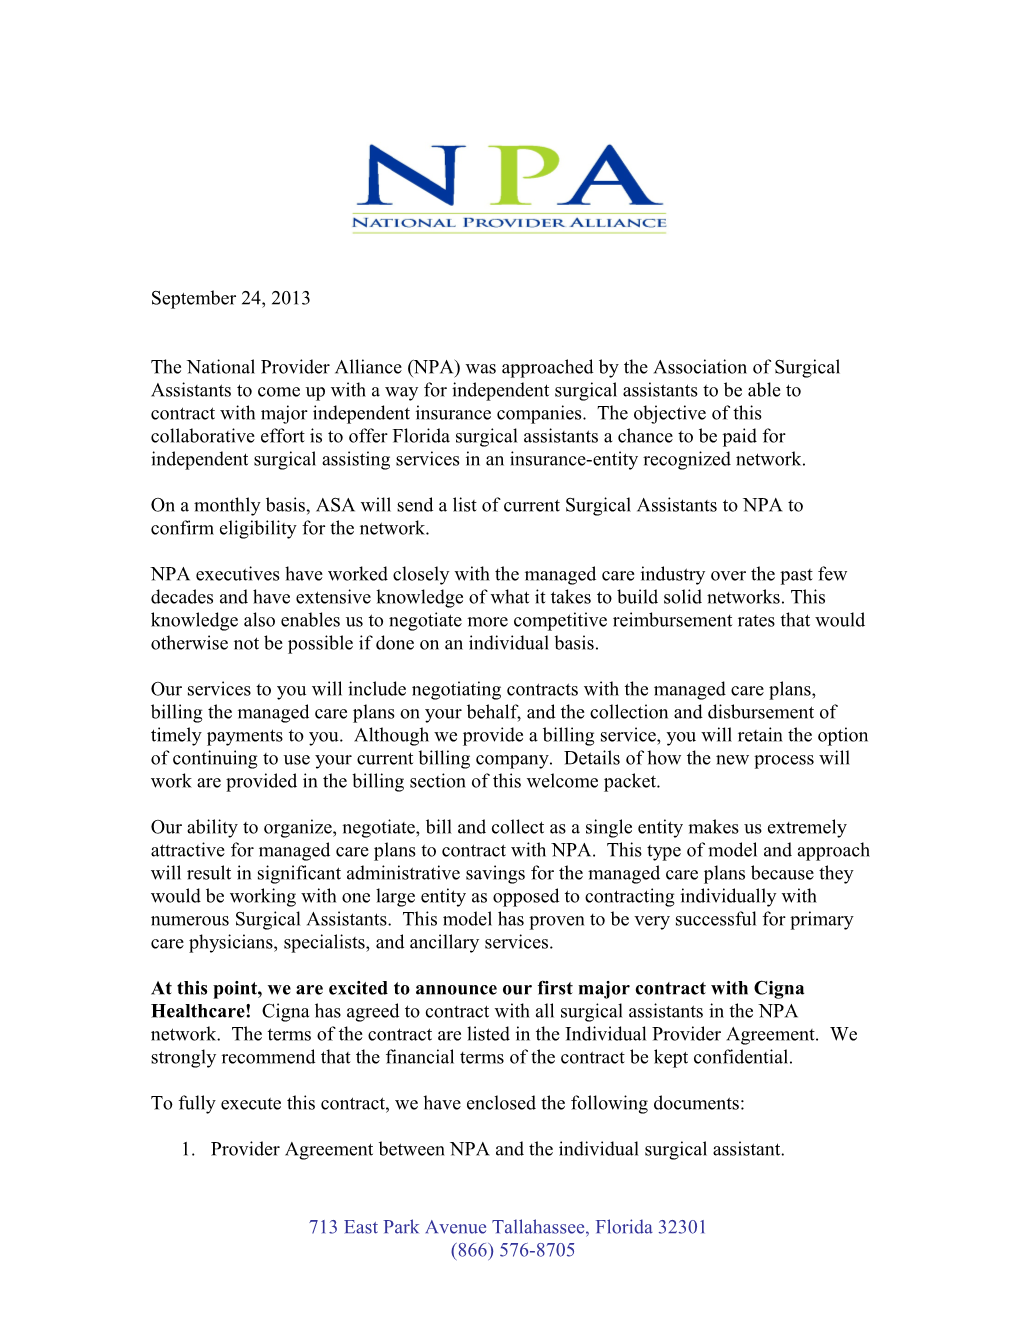 The National Provider Alliance (NPA) Was Approached by the Association of Surgical Assistants